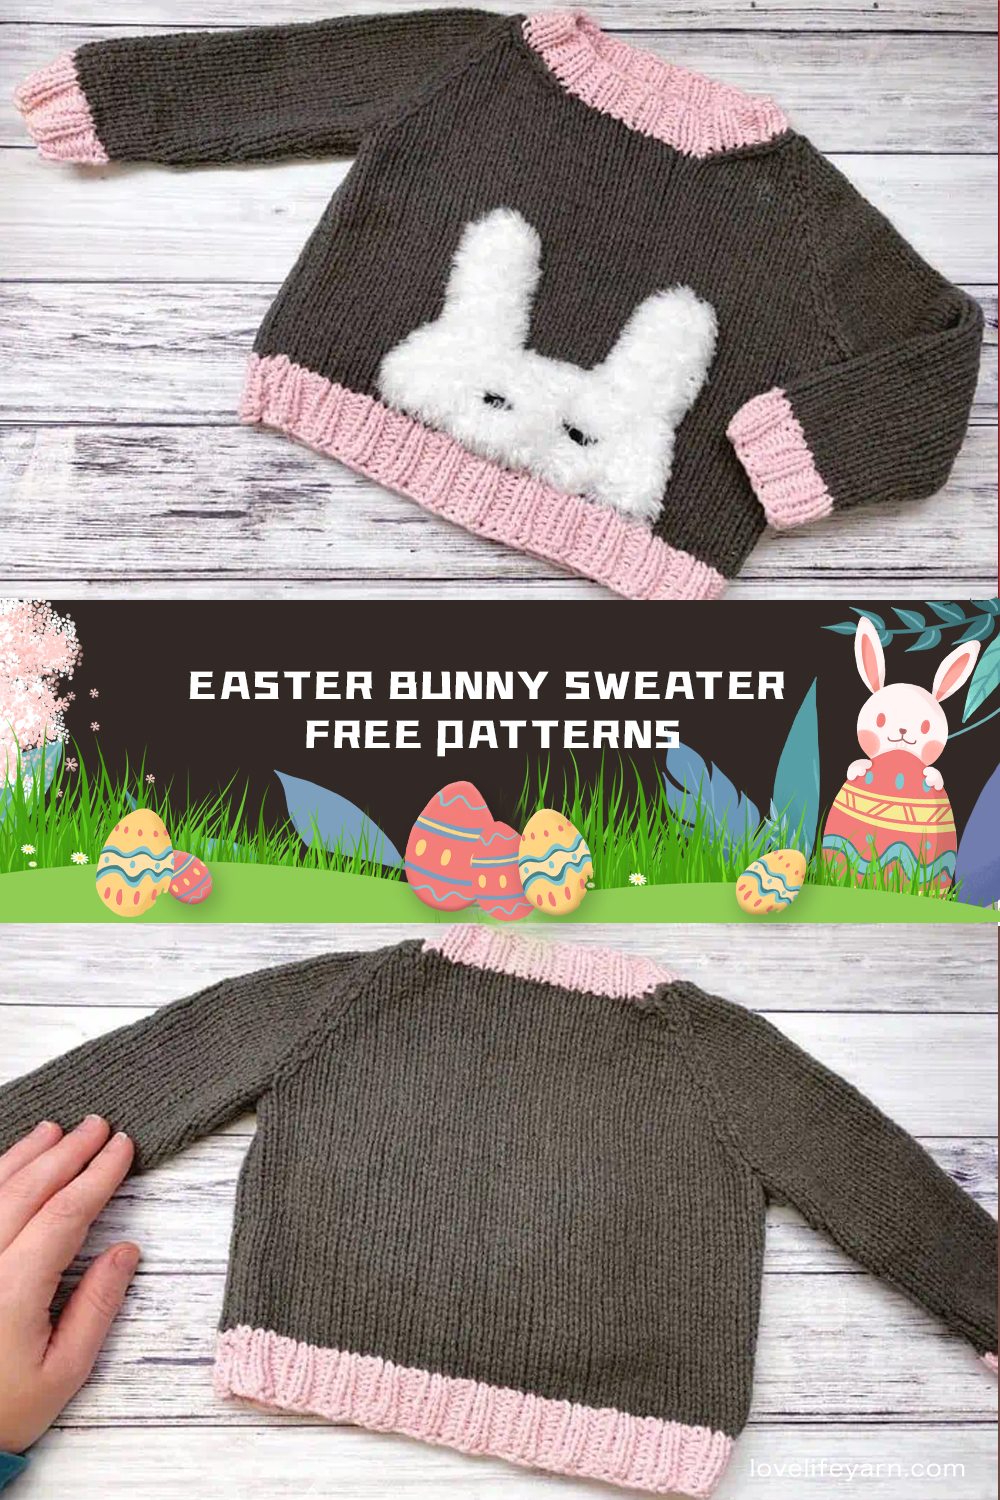 Easter Bunny Sweater FREE Knit Patterns